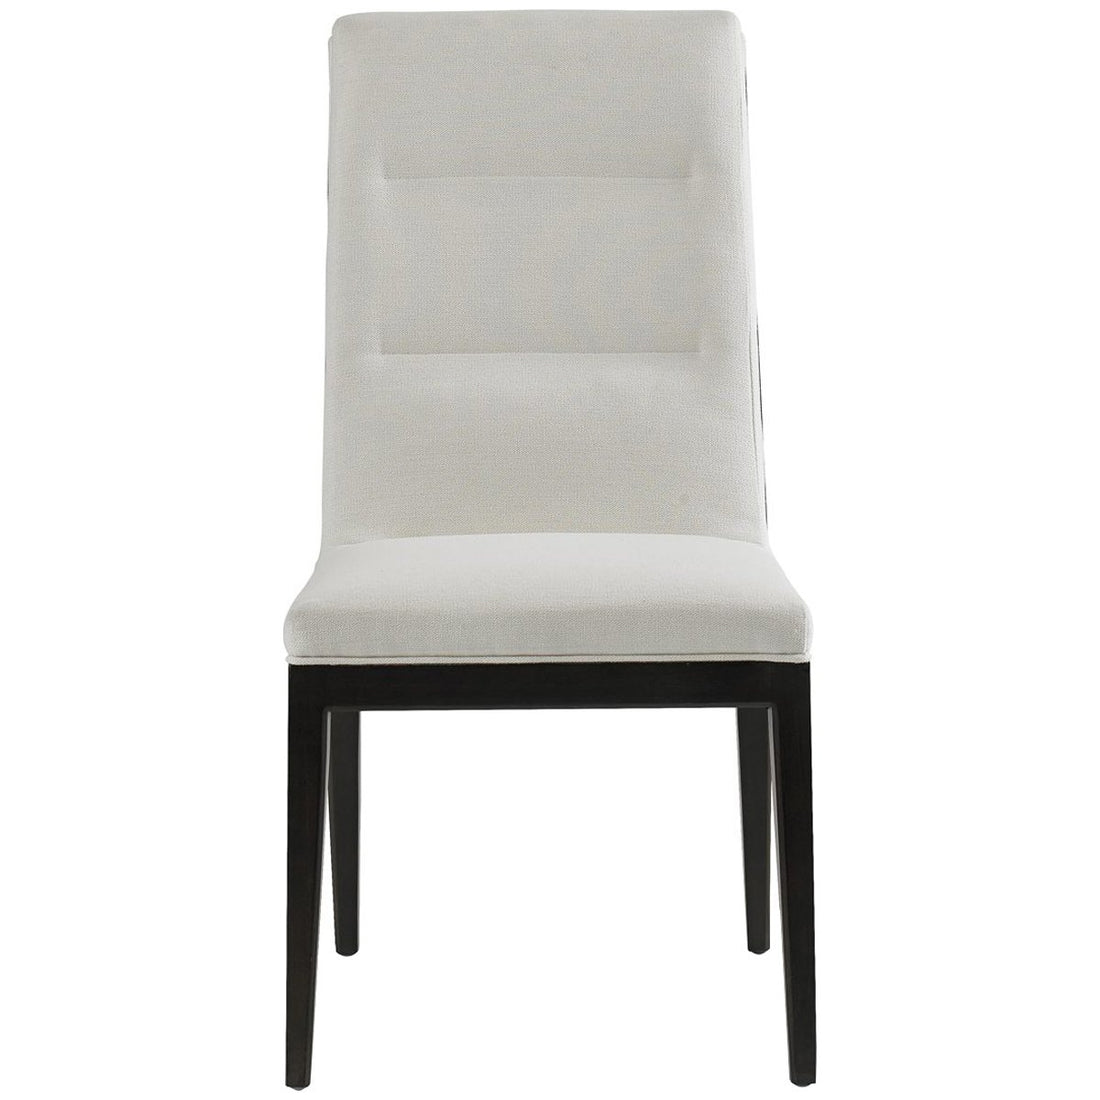 Hickory White Oasis Ellena Upholstered Side Chair